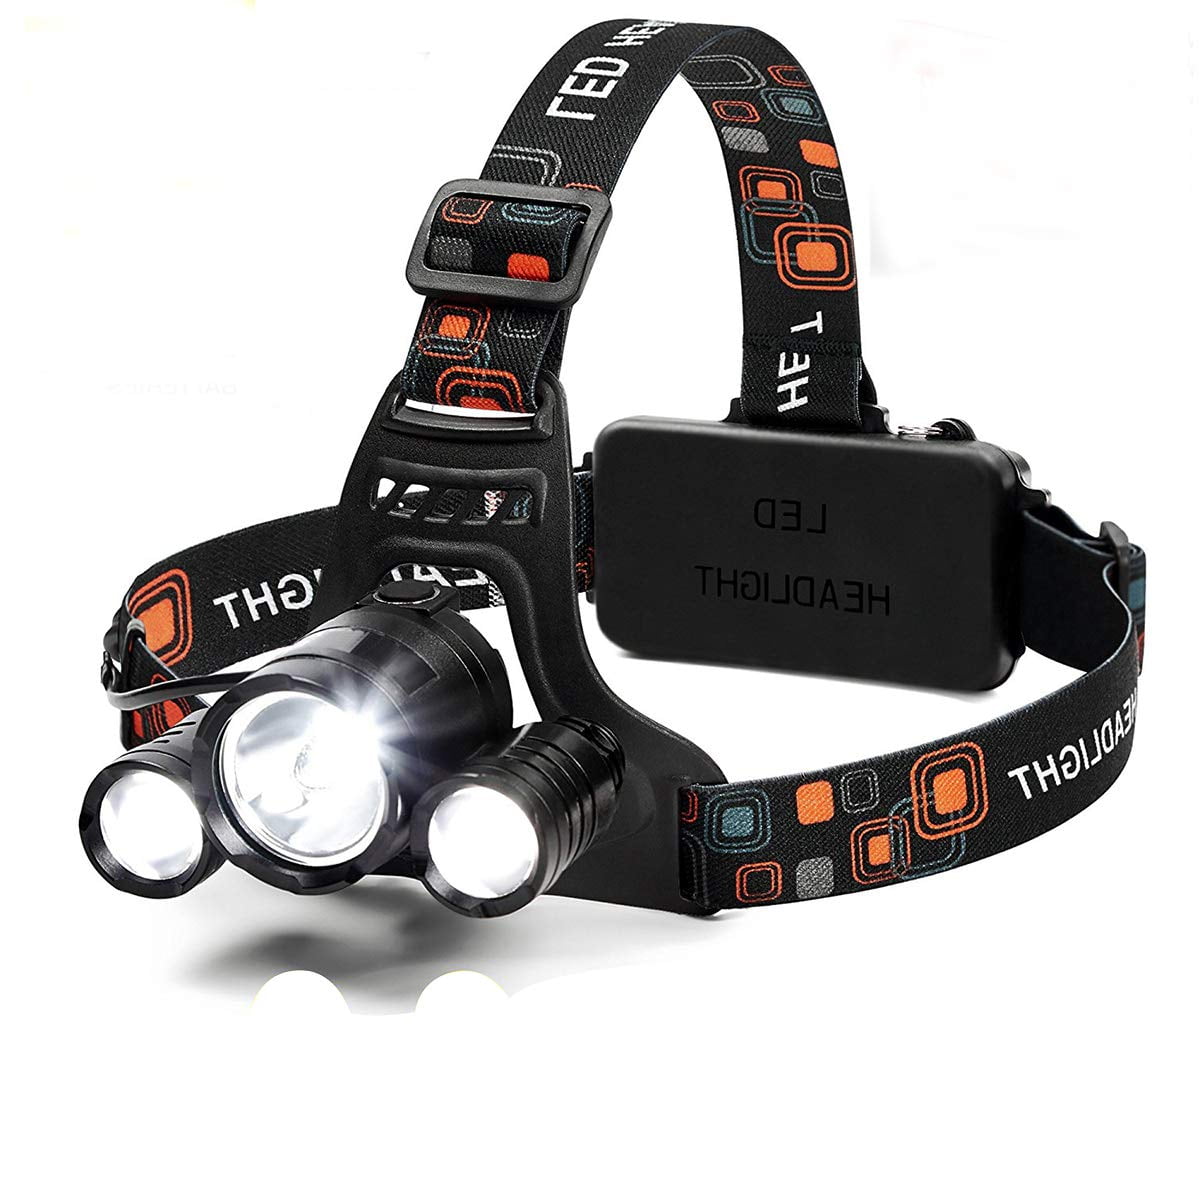 USB Rechargeable COB Headlamp 150lM IPX4 Waterproof 4 Patterns of Lighting Camping Cycling with Adjustable Belt Suitable for Children and Adults Running Fishing Hiking eecoo LED Headlights 